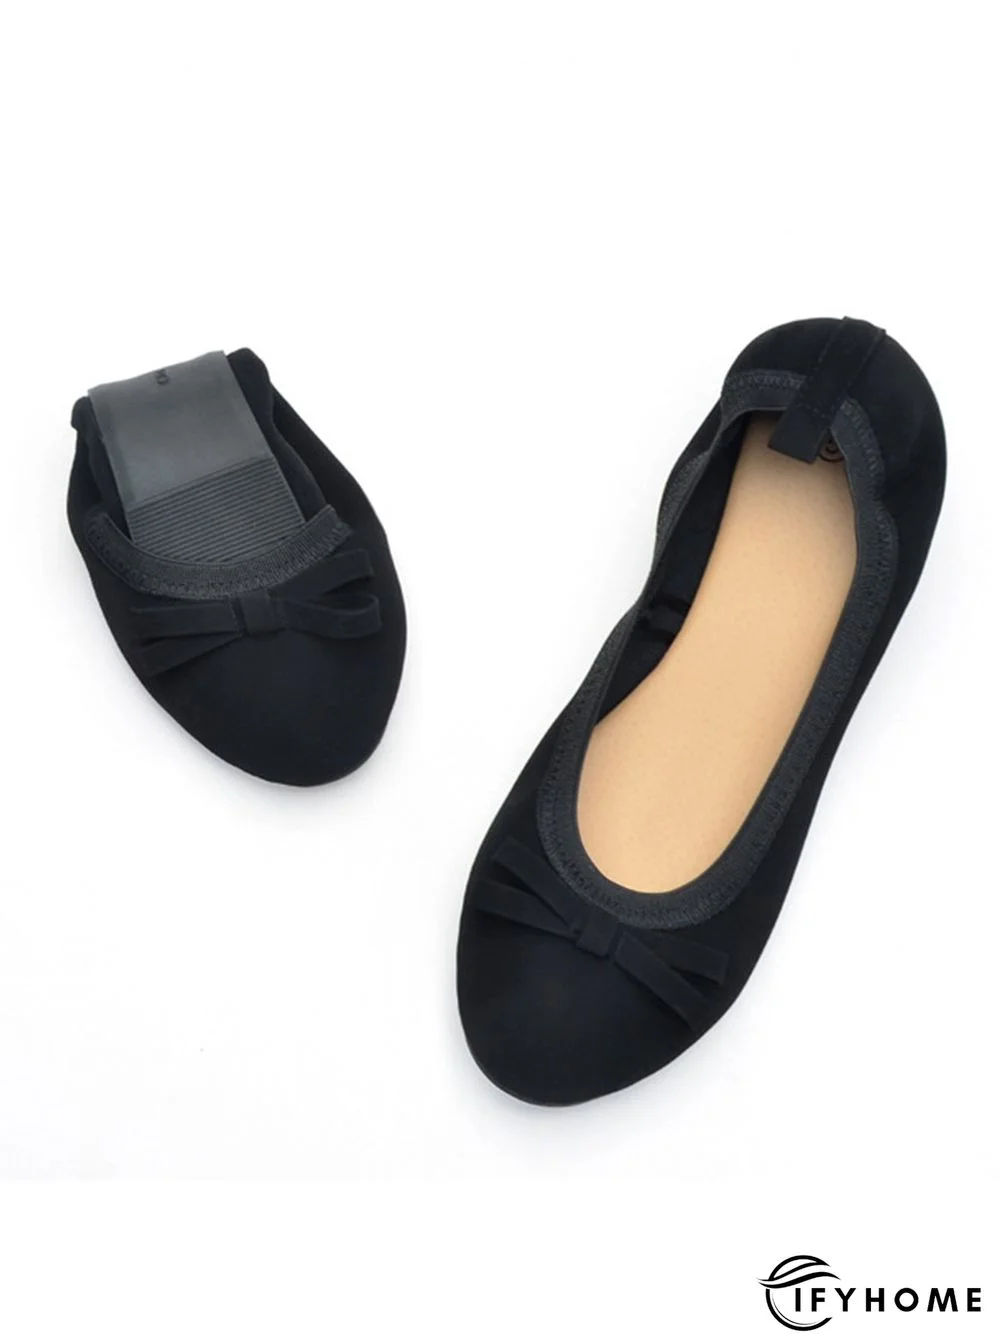 Retro Bow Comfortable Soft Shallow Ballet Shoes | IFYHOME